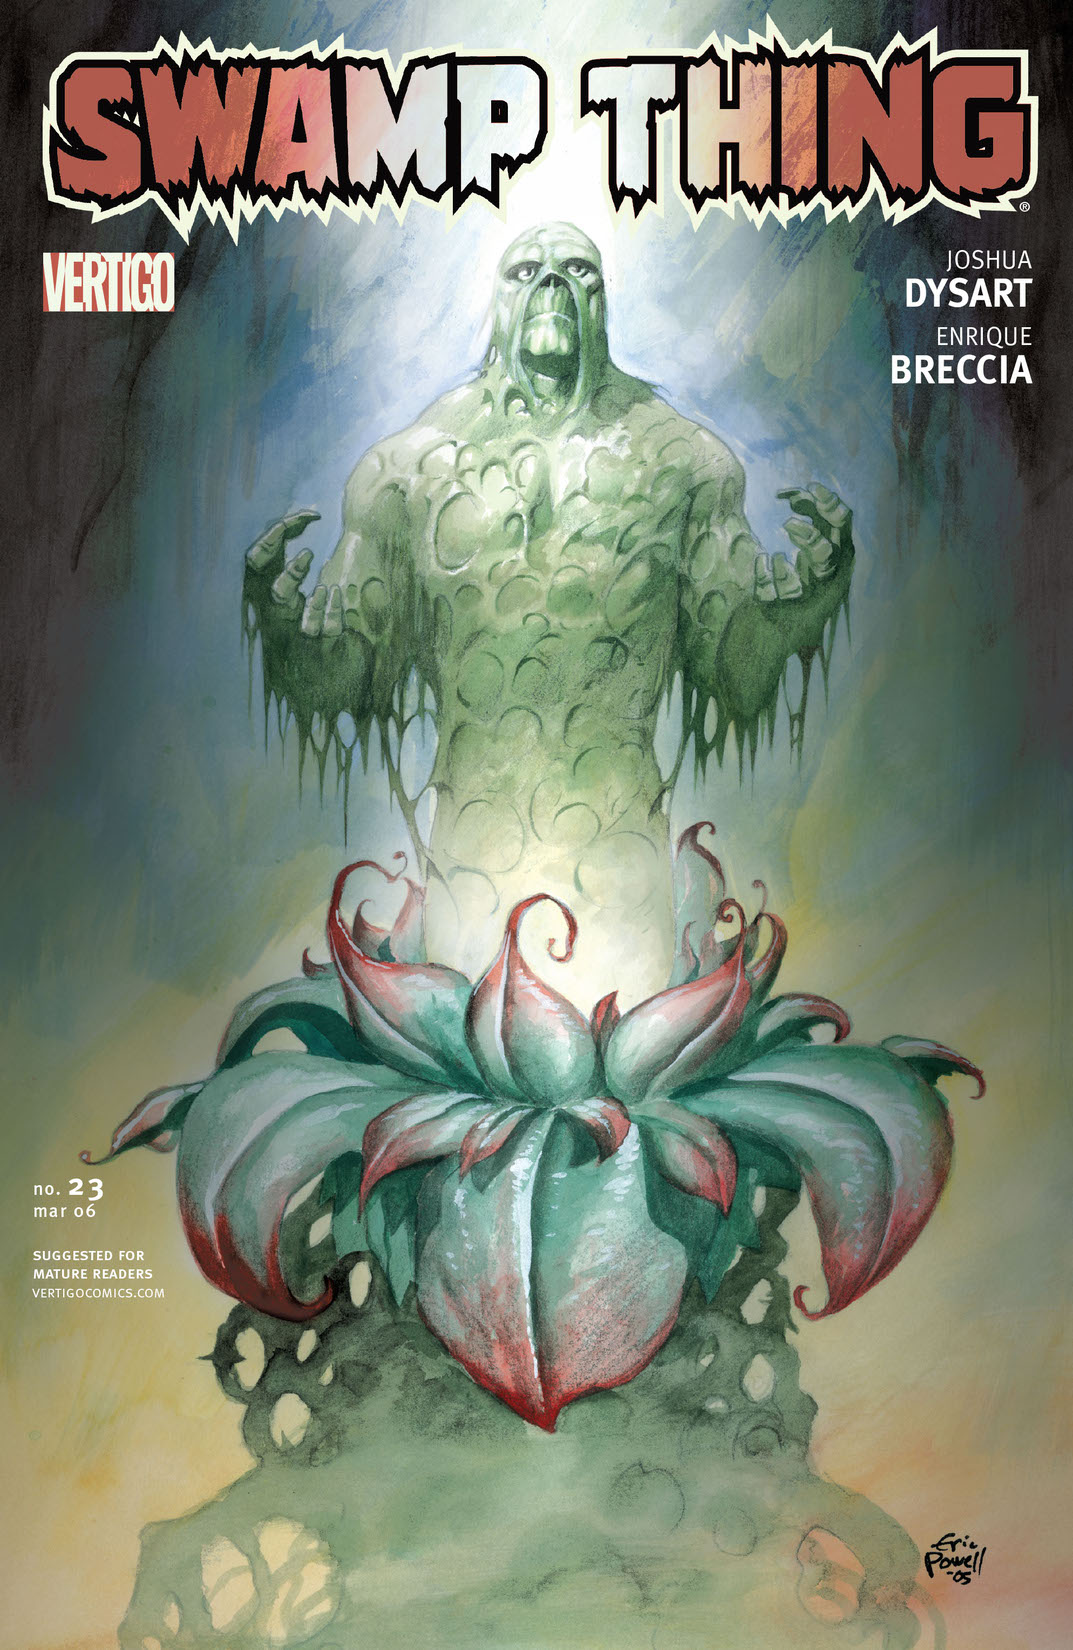 Swamp Thing (2004-) #23 preview images